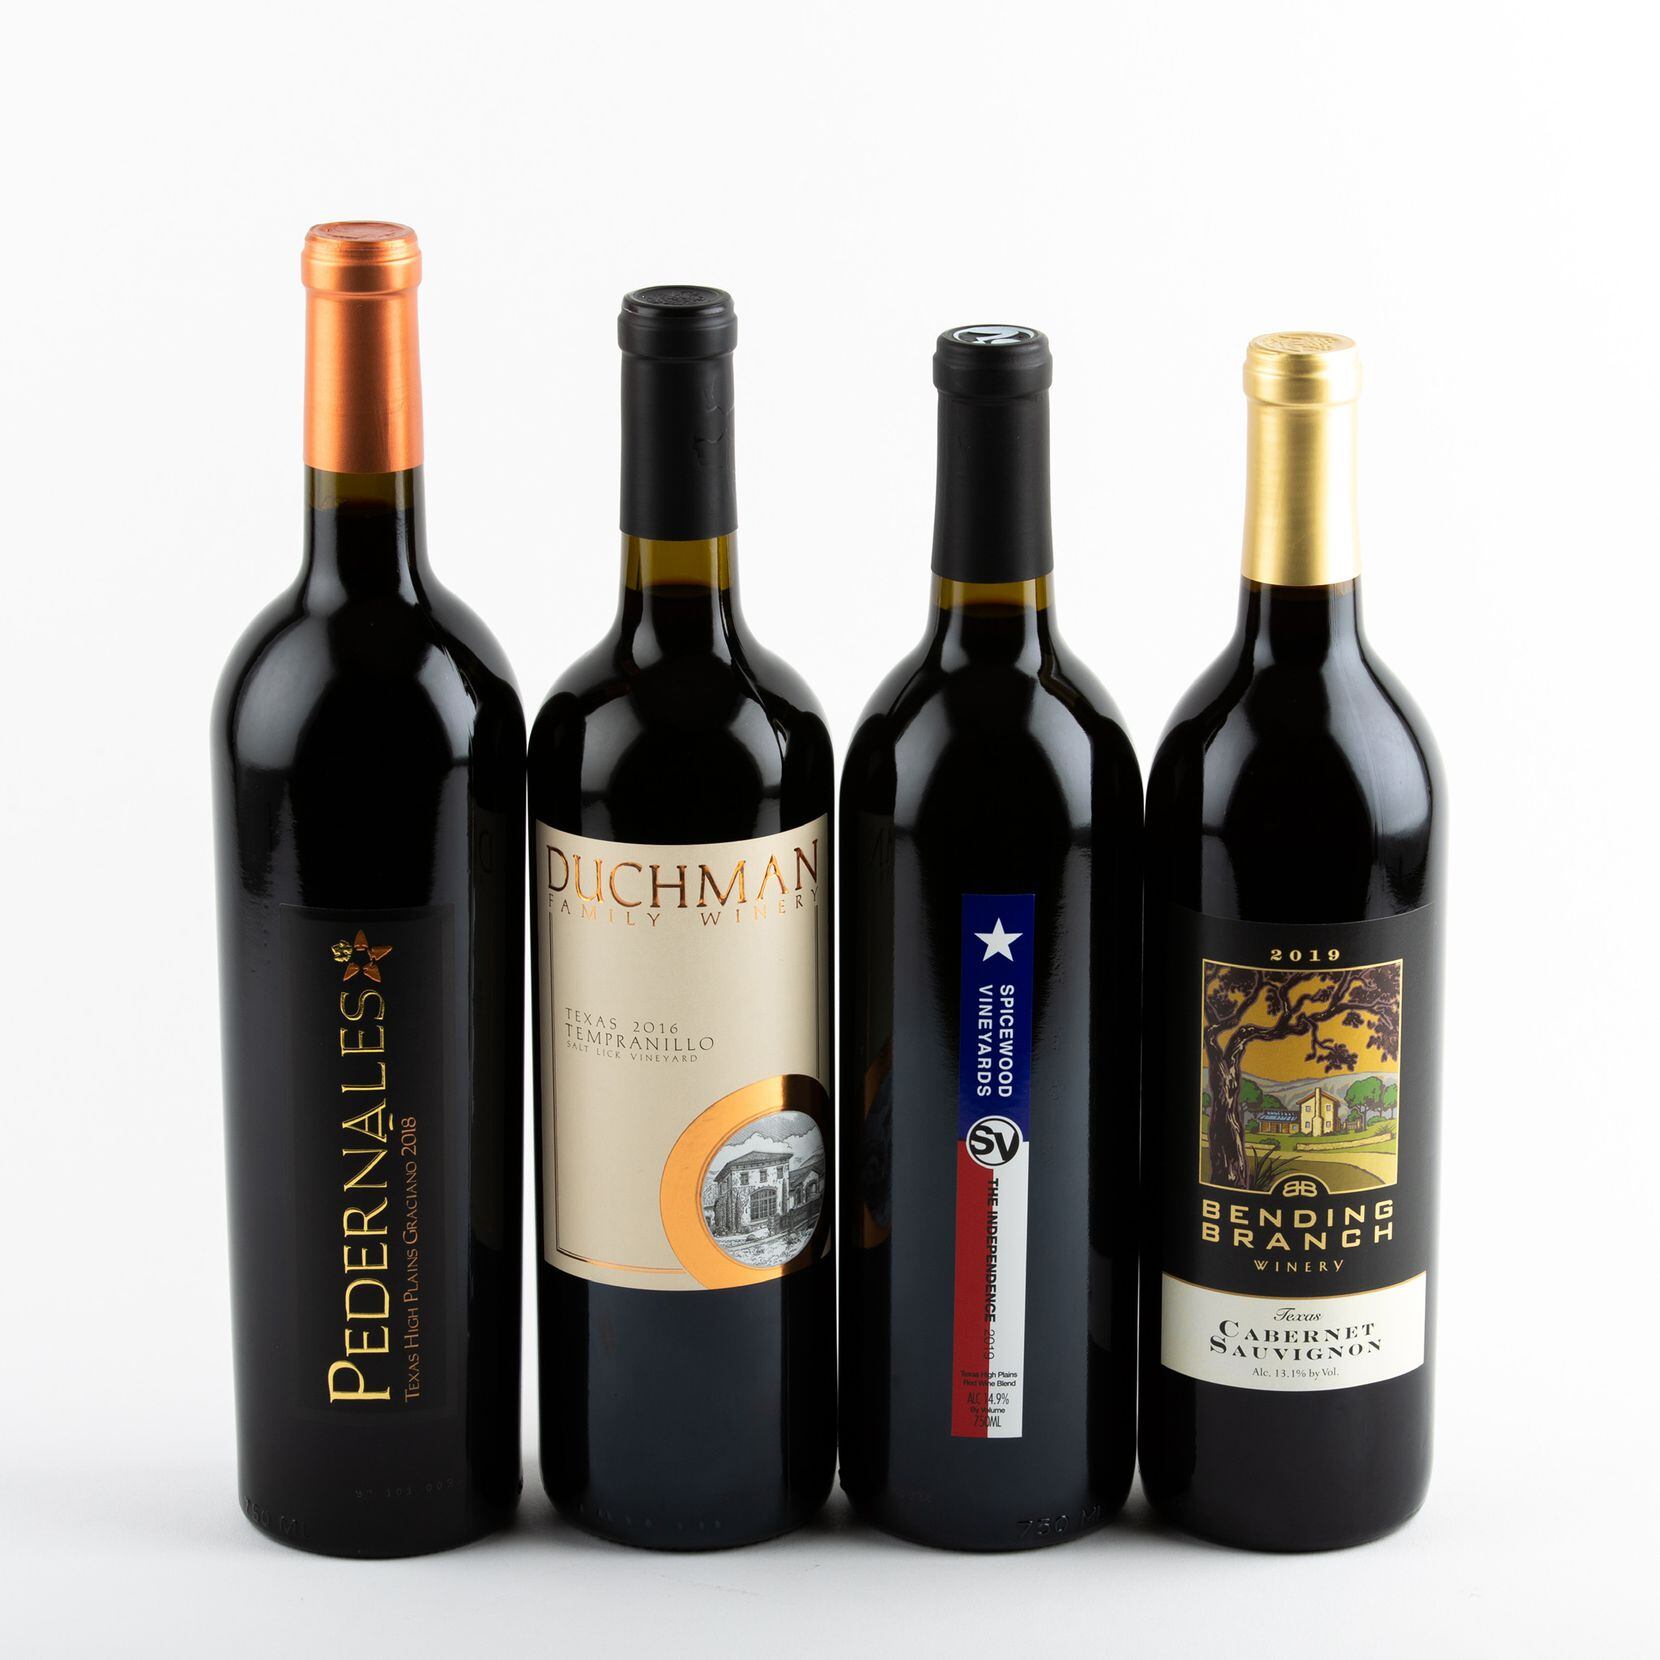 The Texas Fine Wine Holiday Bundle includes four wines made with Texas-grown grapes.